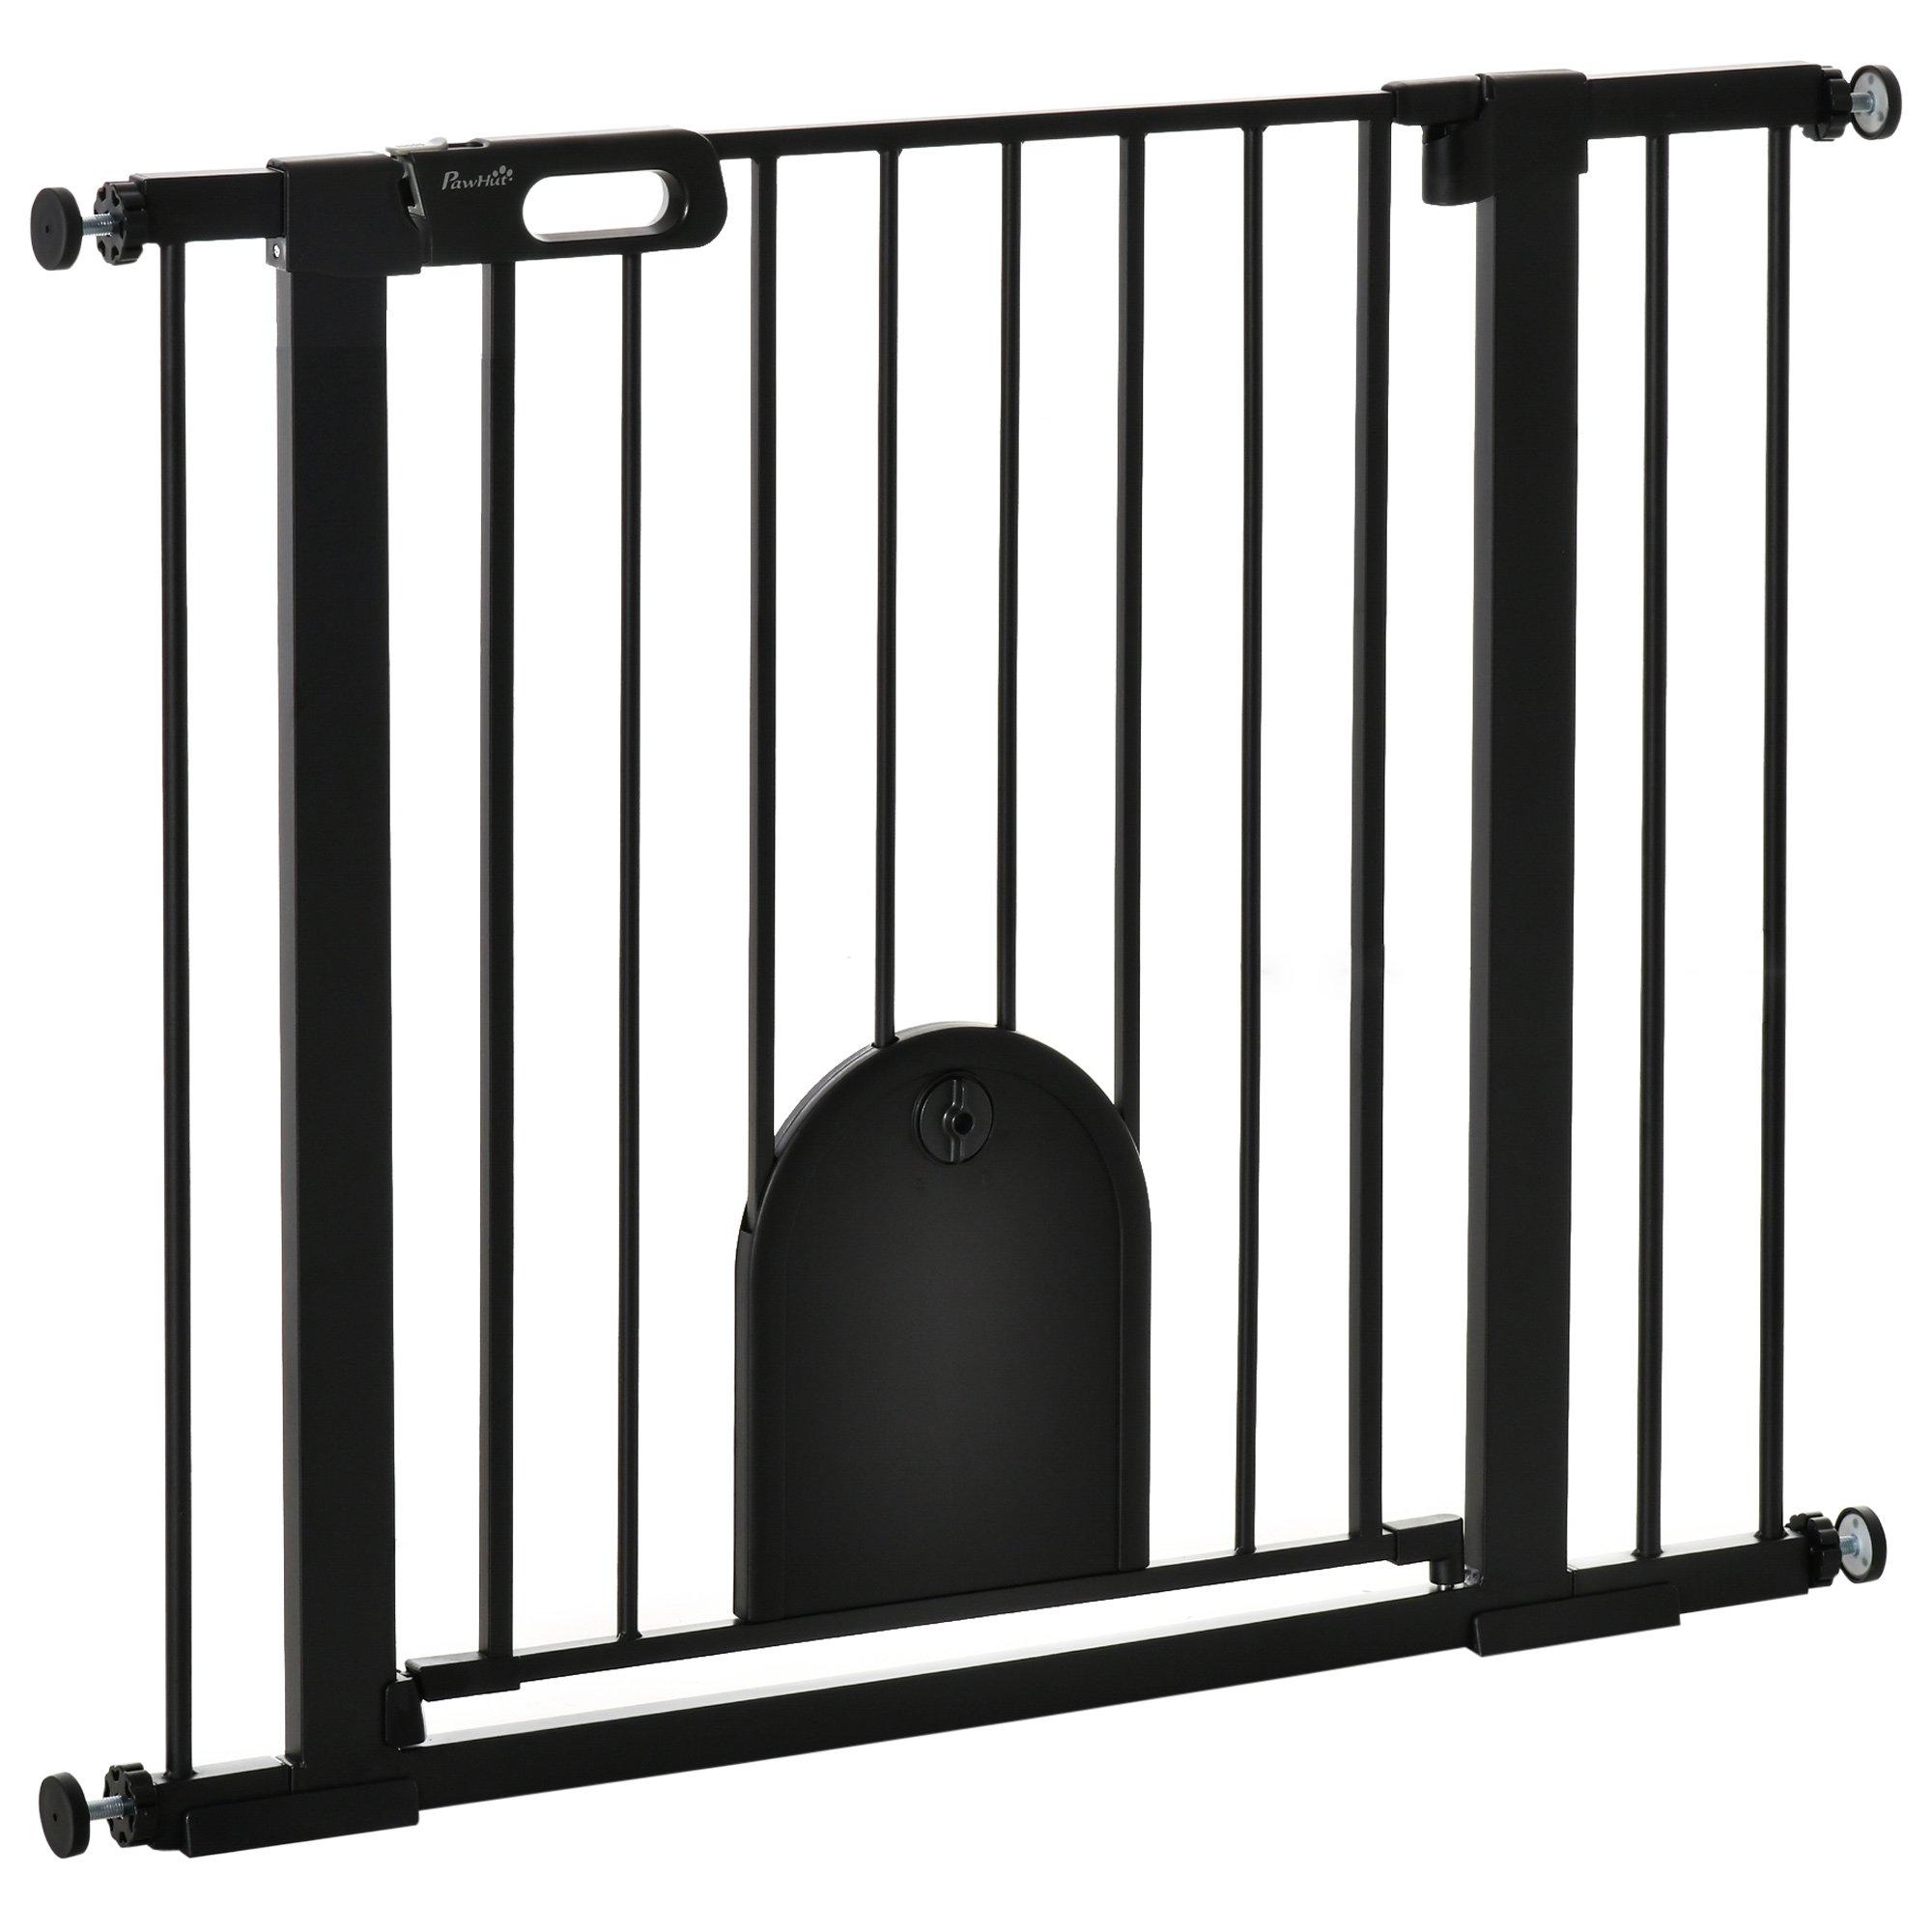 75-82 cm Pet Safety Gate, Stair Pressure Fit, Auto Close, Double Locking